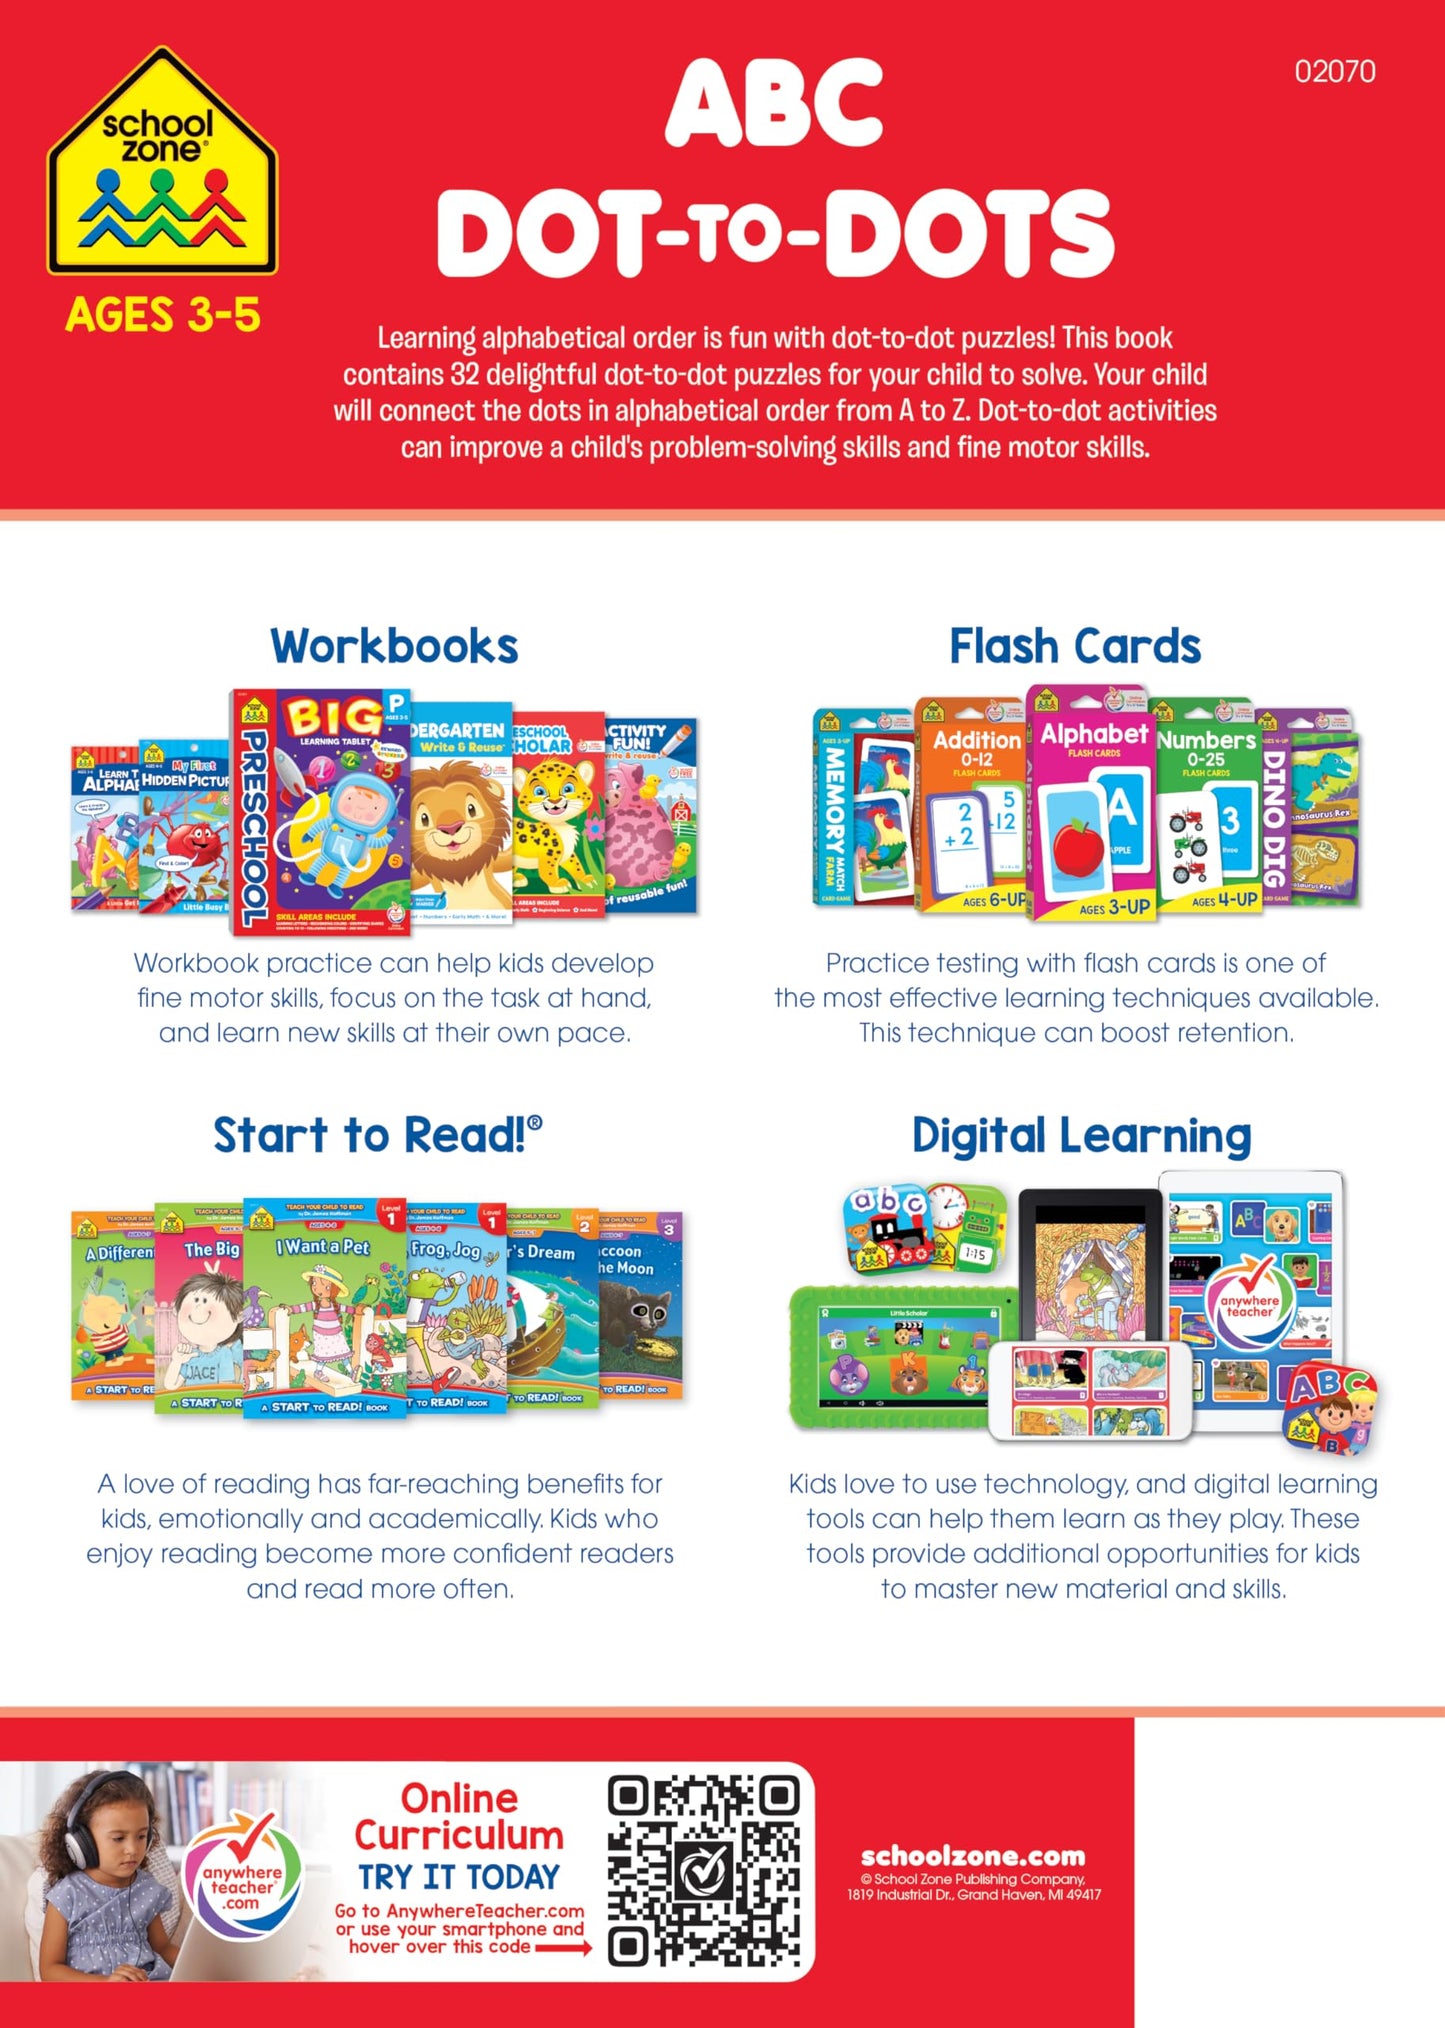 School Zone ABC Dot-to-Dots Workbook: Preschool, Kindergarten, Connect the Dots, Alphabet, Letter Puzzles, Creative, and More (A Get Ready!™ Activity Book Series)